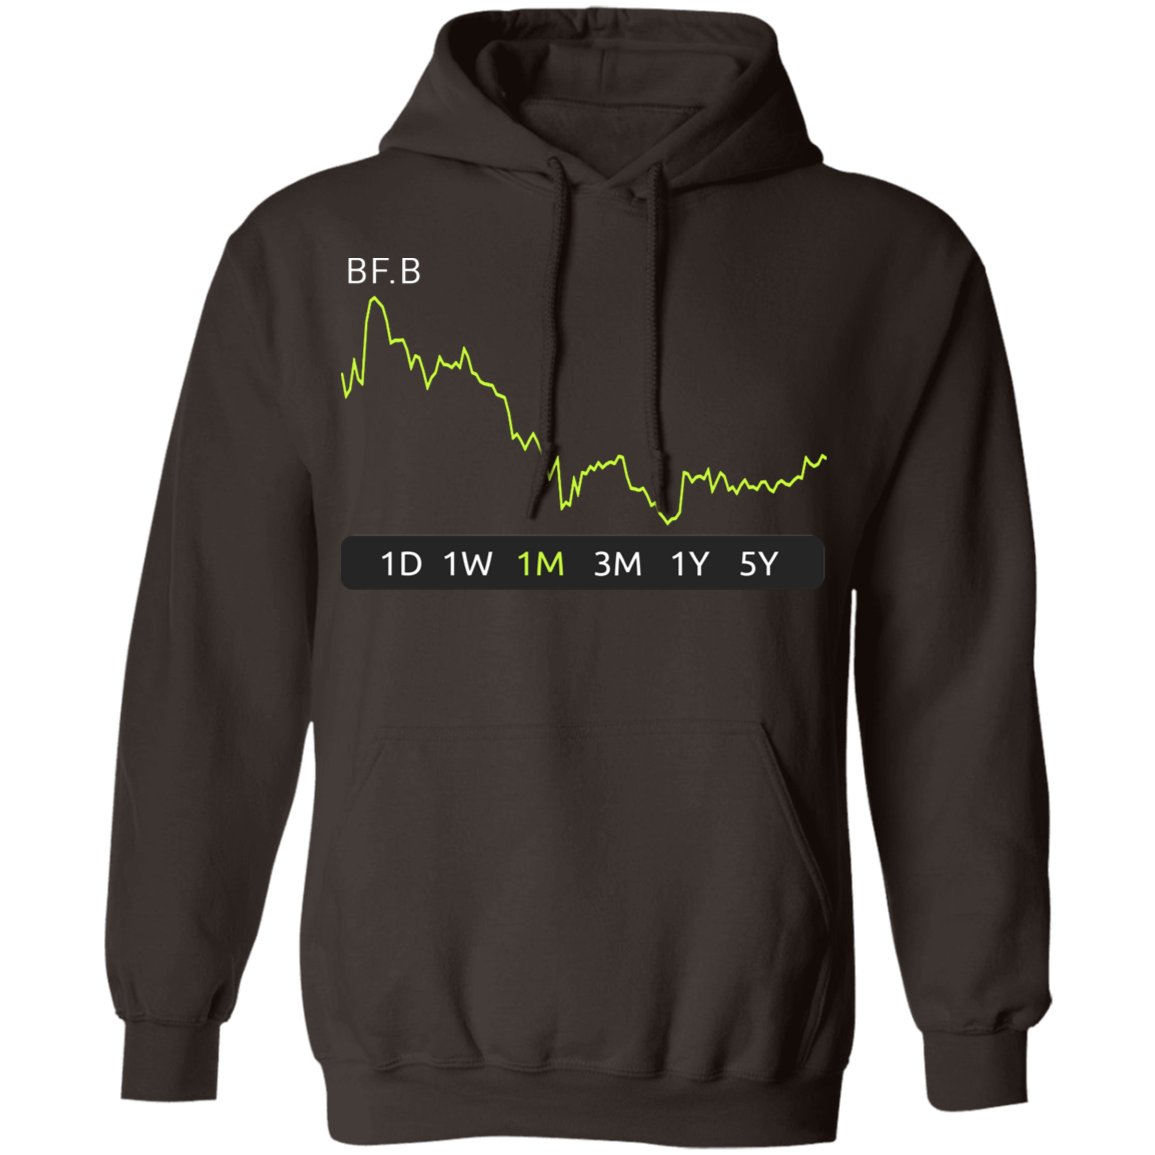 BF.B Stock 1m Pullover Hoodie